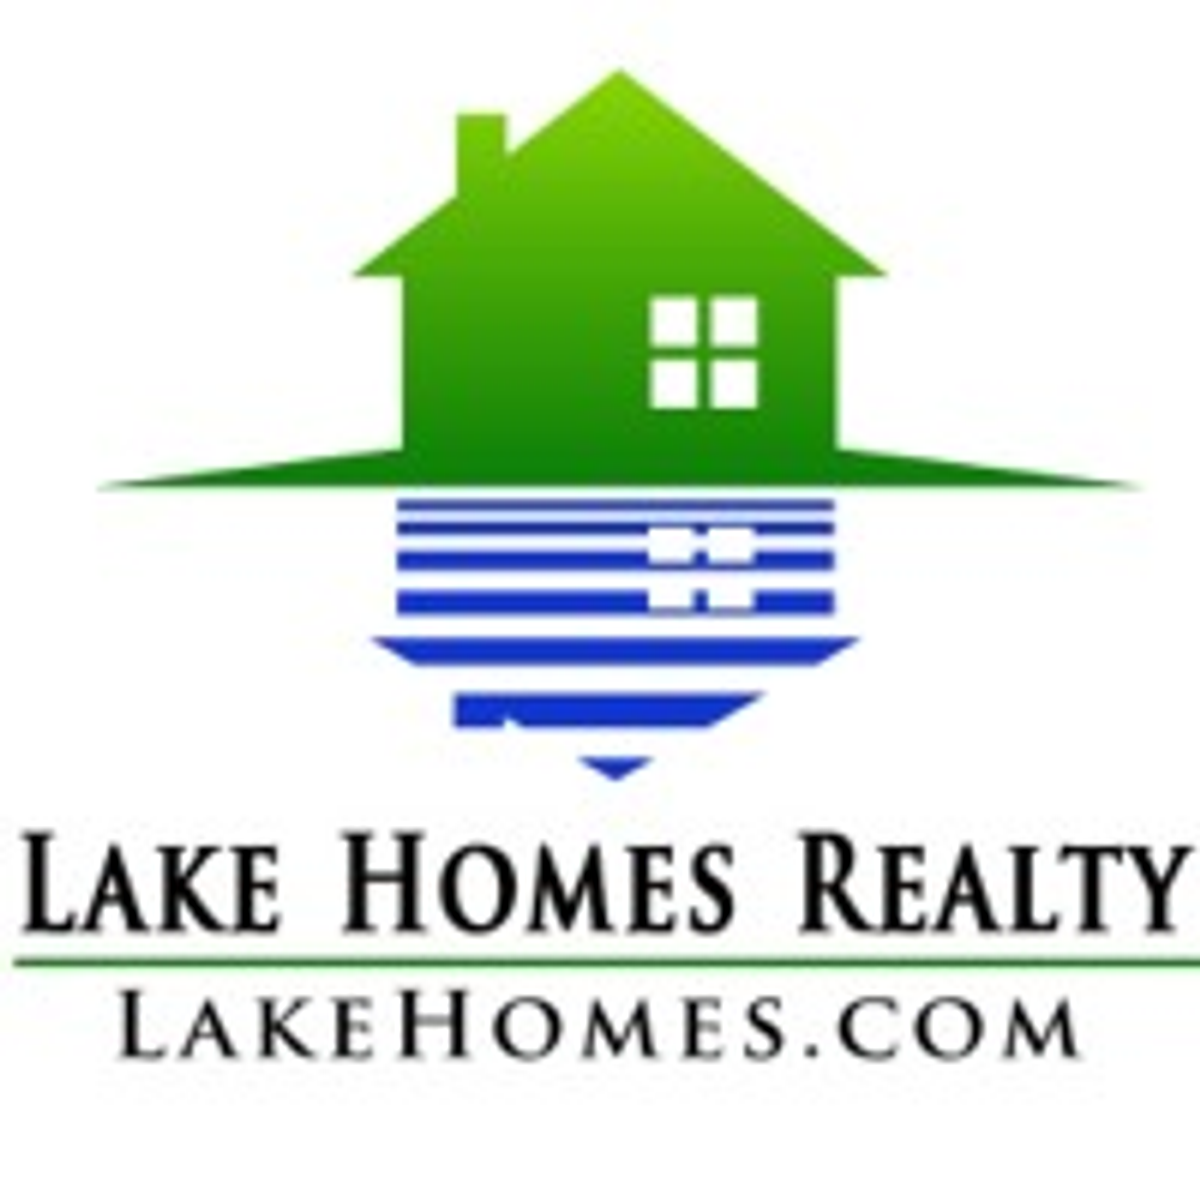 Photo for Margaret Decker, Listing Agent at Lake Homes Realty LLC